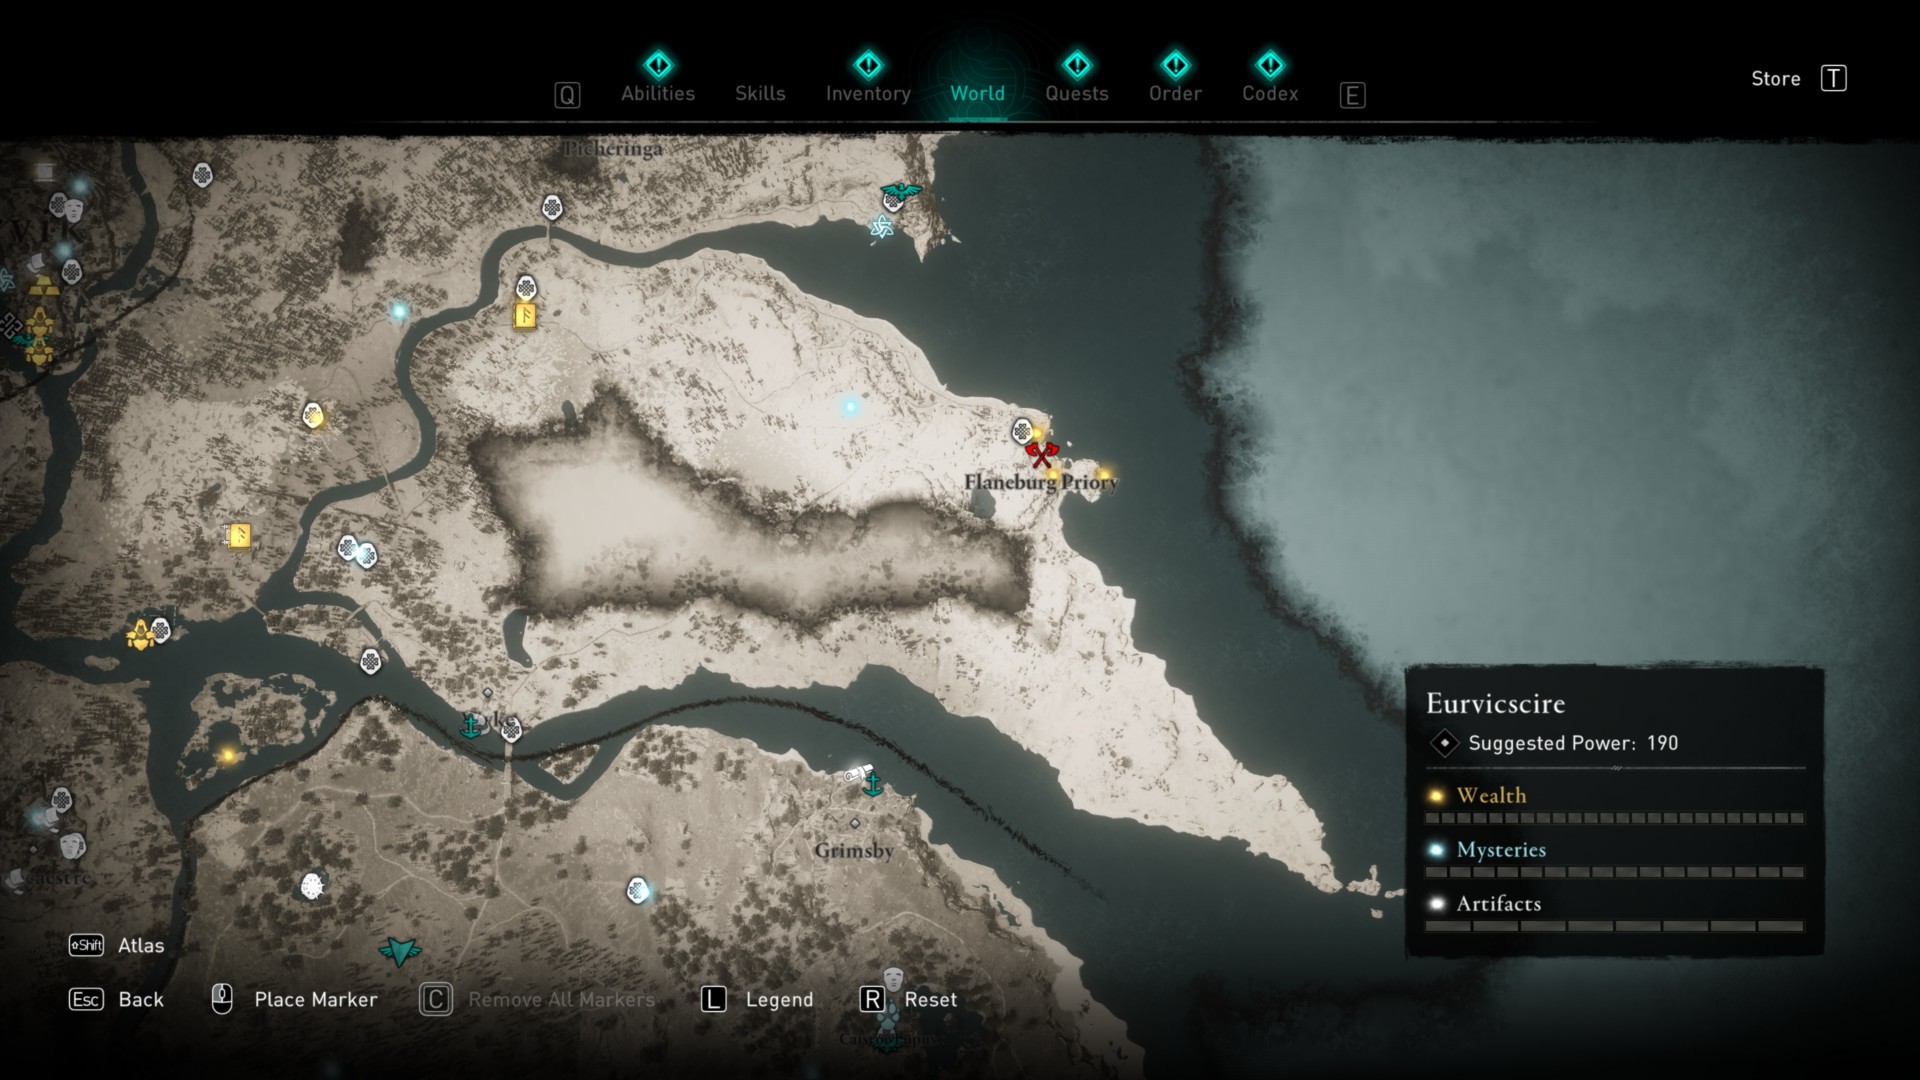 All Assassin's Creed Valhalla Euriviscire Wealth, Mysteries, and Artifacts  locations map - Polygon